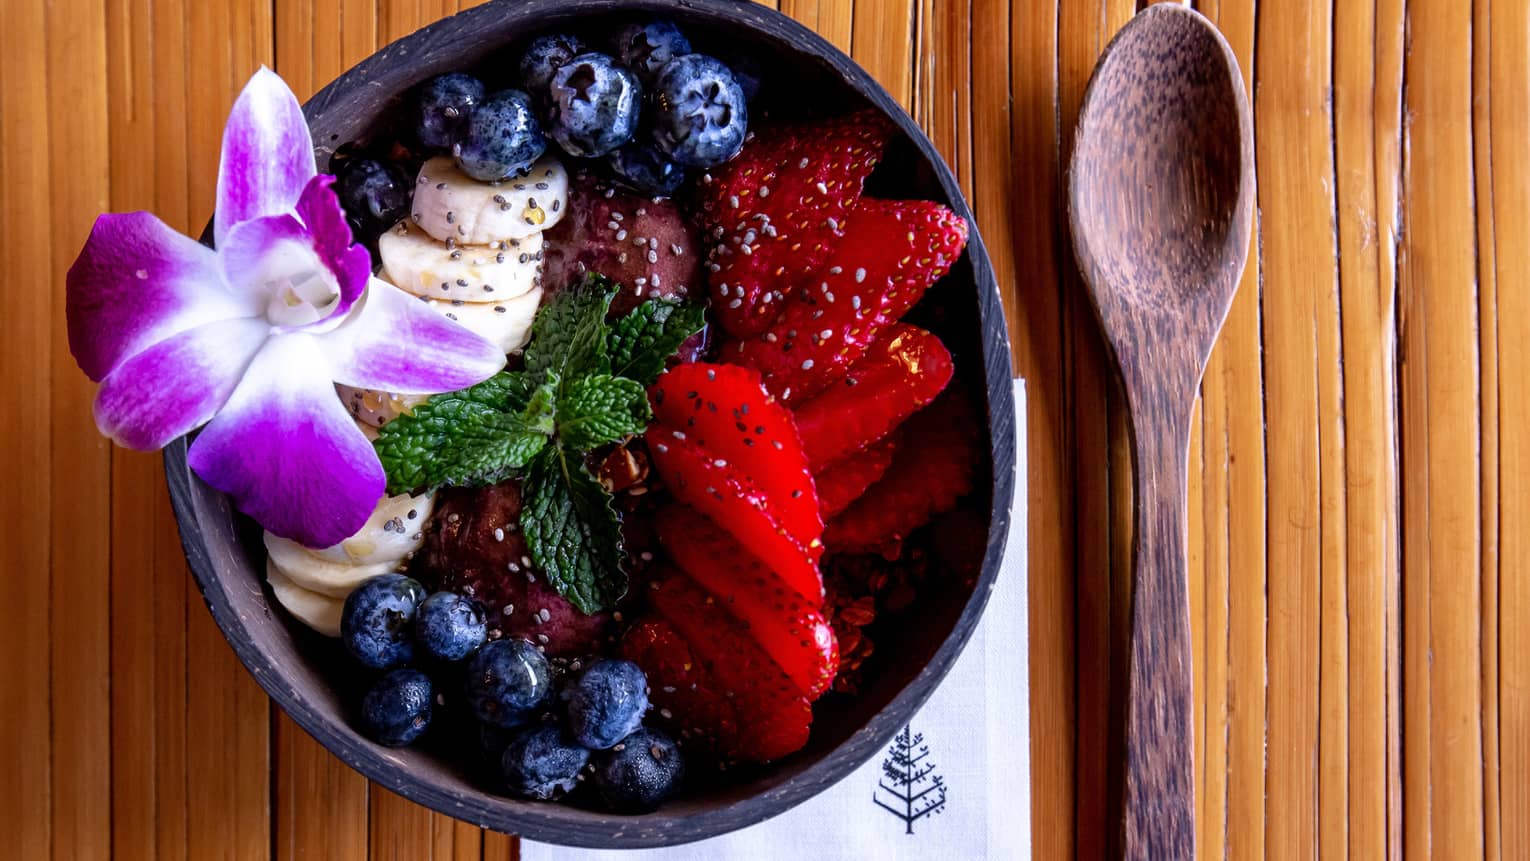 Acai bowl with strawberries, blueberries and a Hawaiian flower